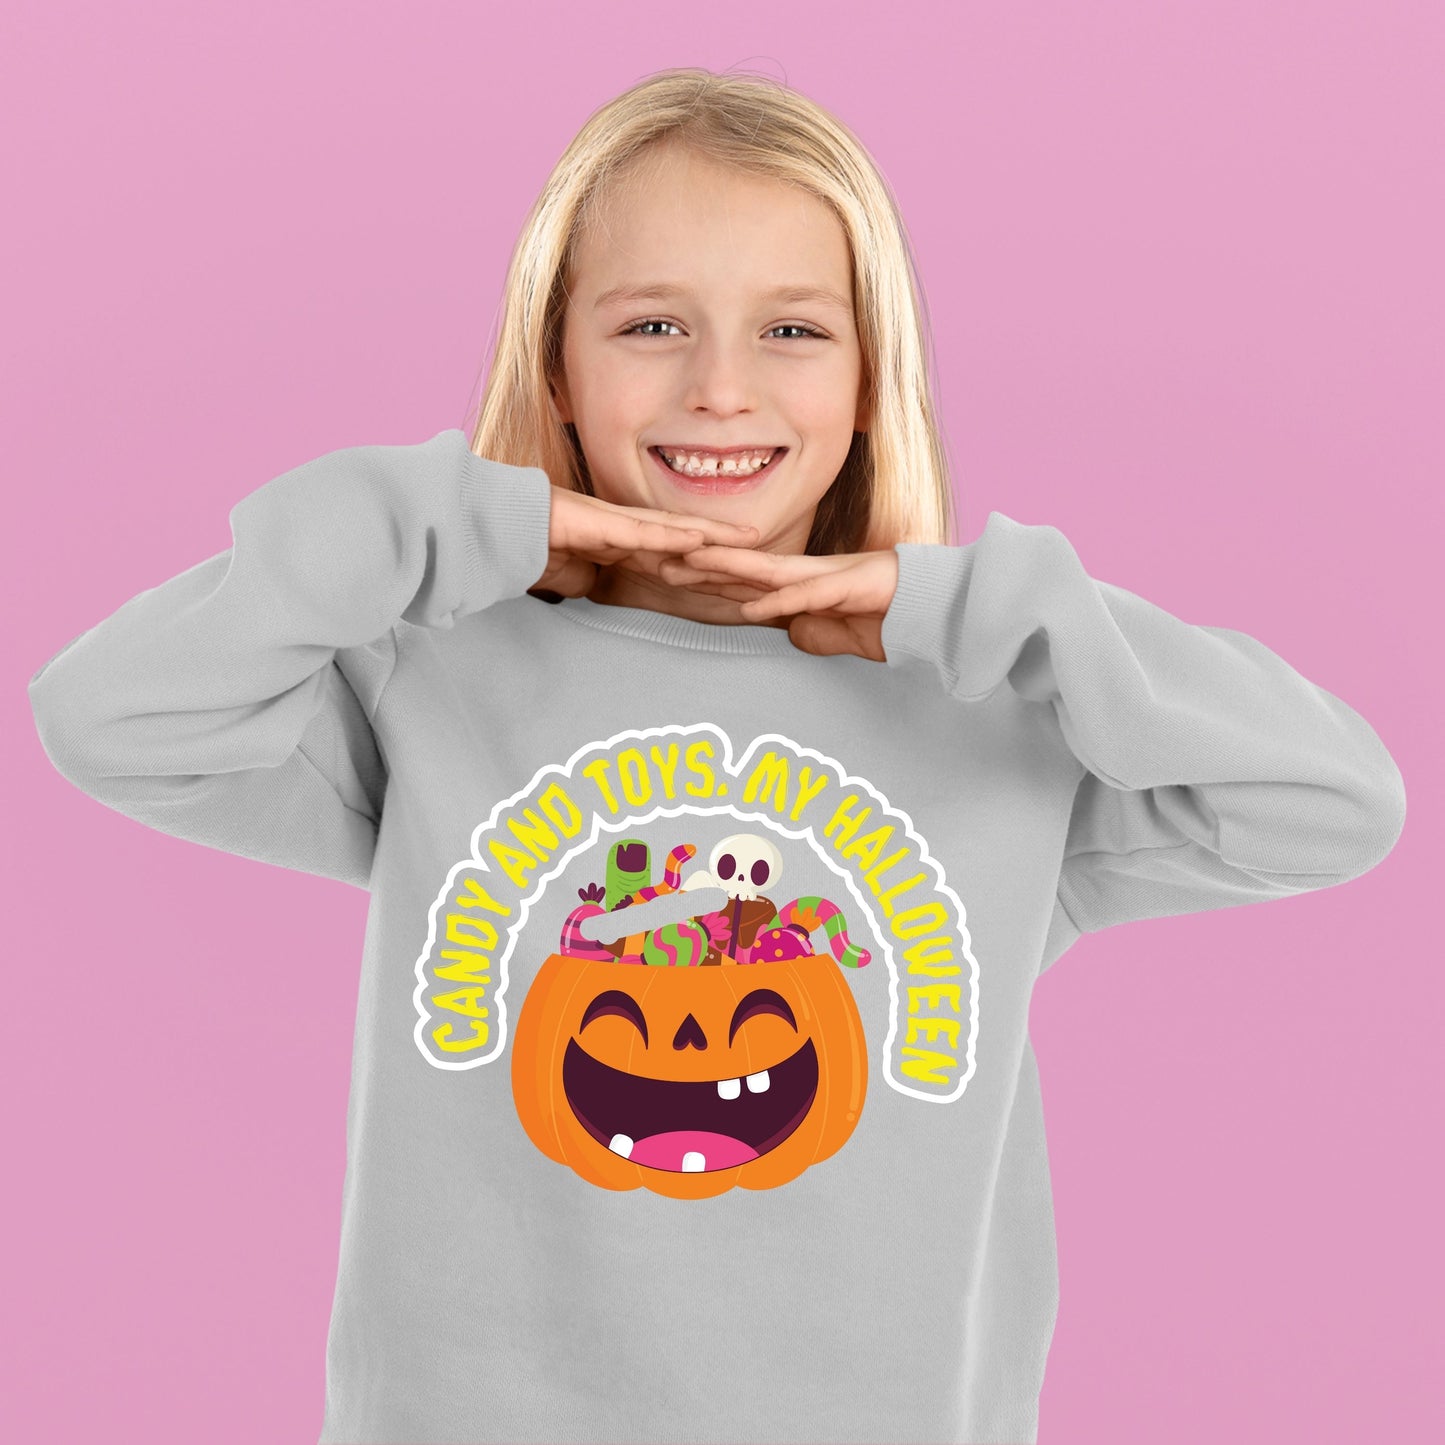 Halloween Candy and Toys Bodysuit, Halloween Gift Bodysuit, Halloween Onesies, Cute Halloween Bodysuit, Funny Halloween Bodysuit